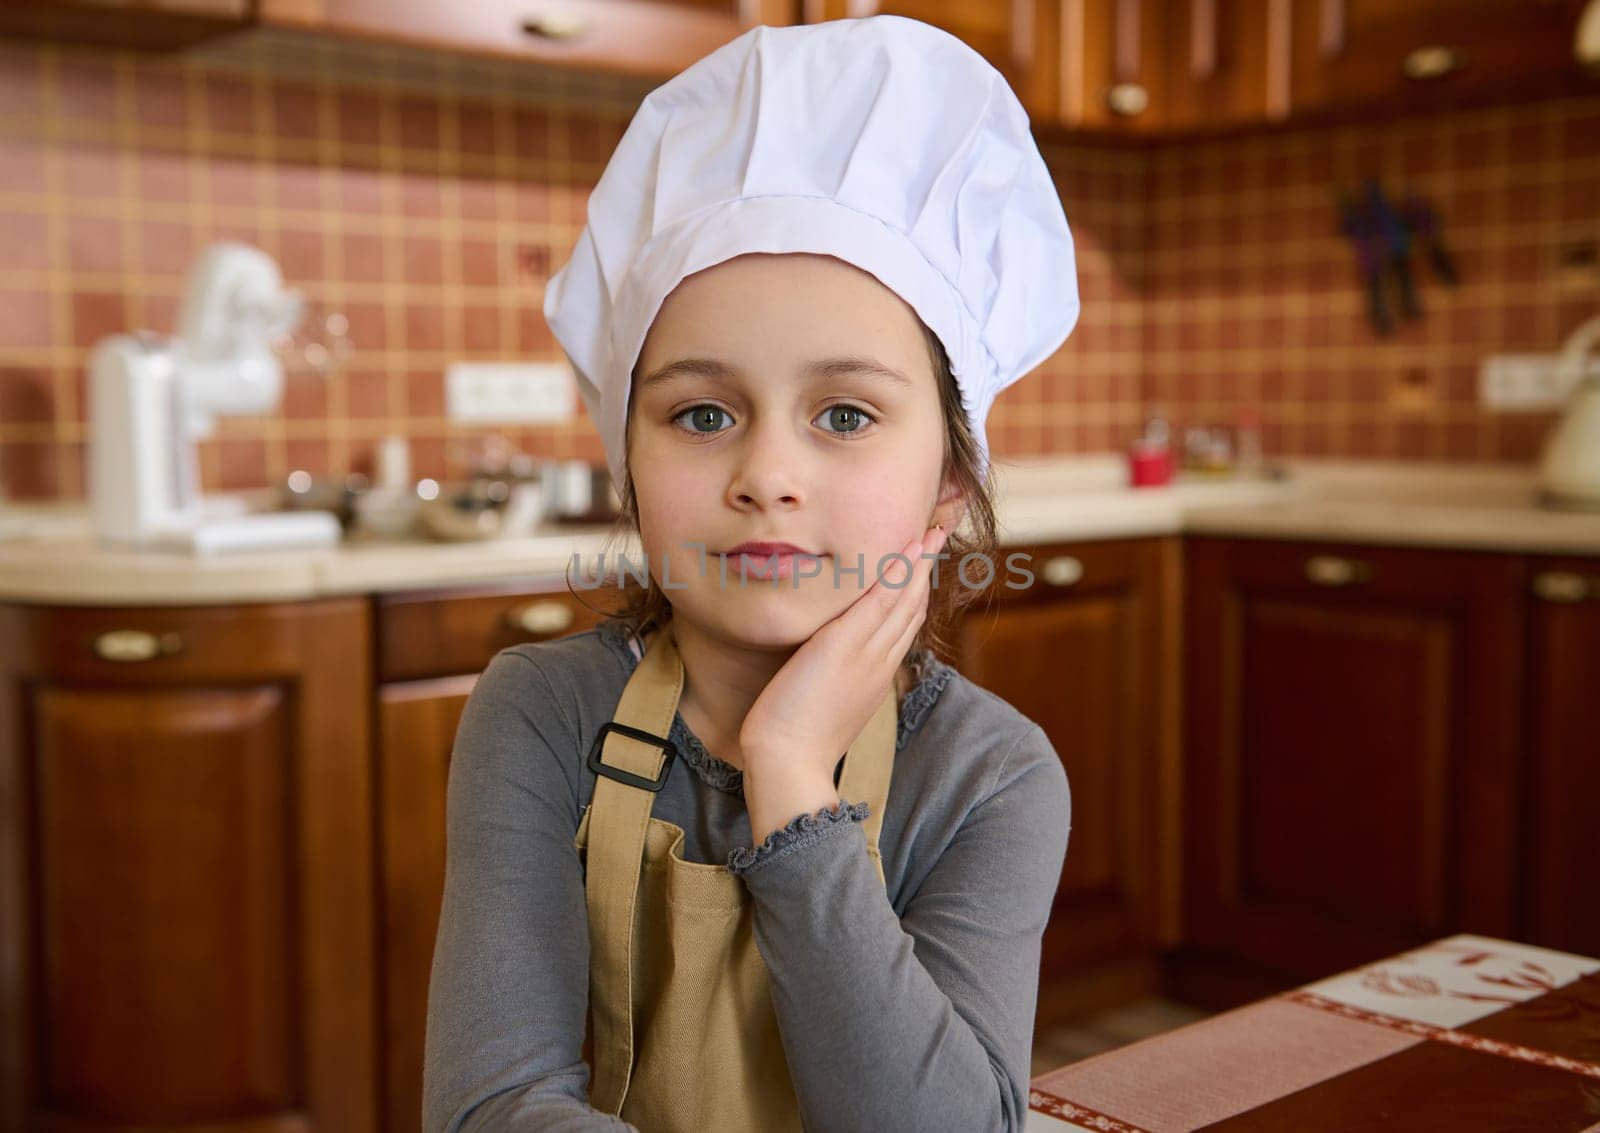 Authentic portrait of Caucasian adorable child girl in white chef hat and beige apron, little baker confectioner looks at camera, standing at home kitchen interior. Cooking class. Kids learn culinary